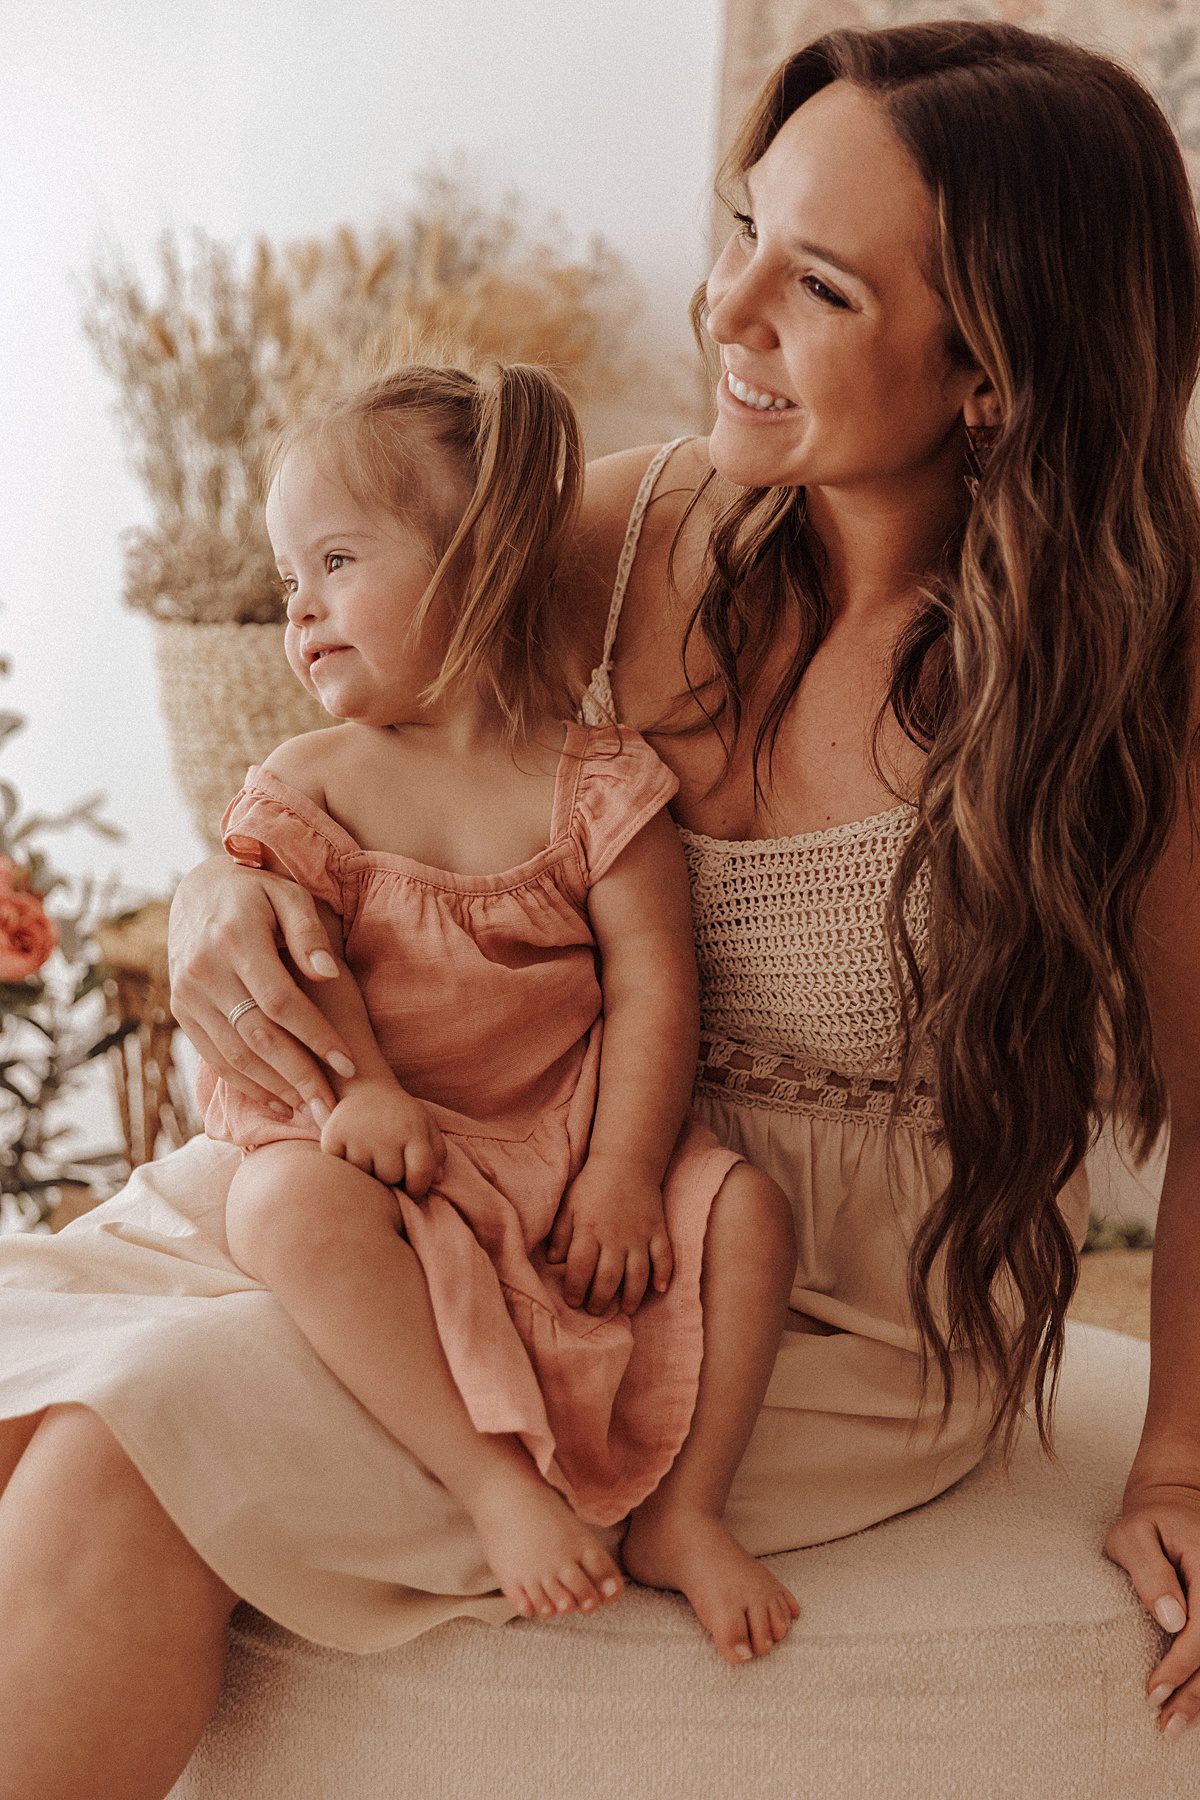 Mother and daughter smile while holding each other close for a photograph